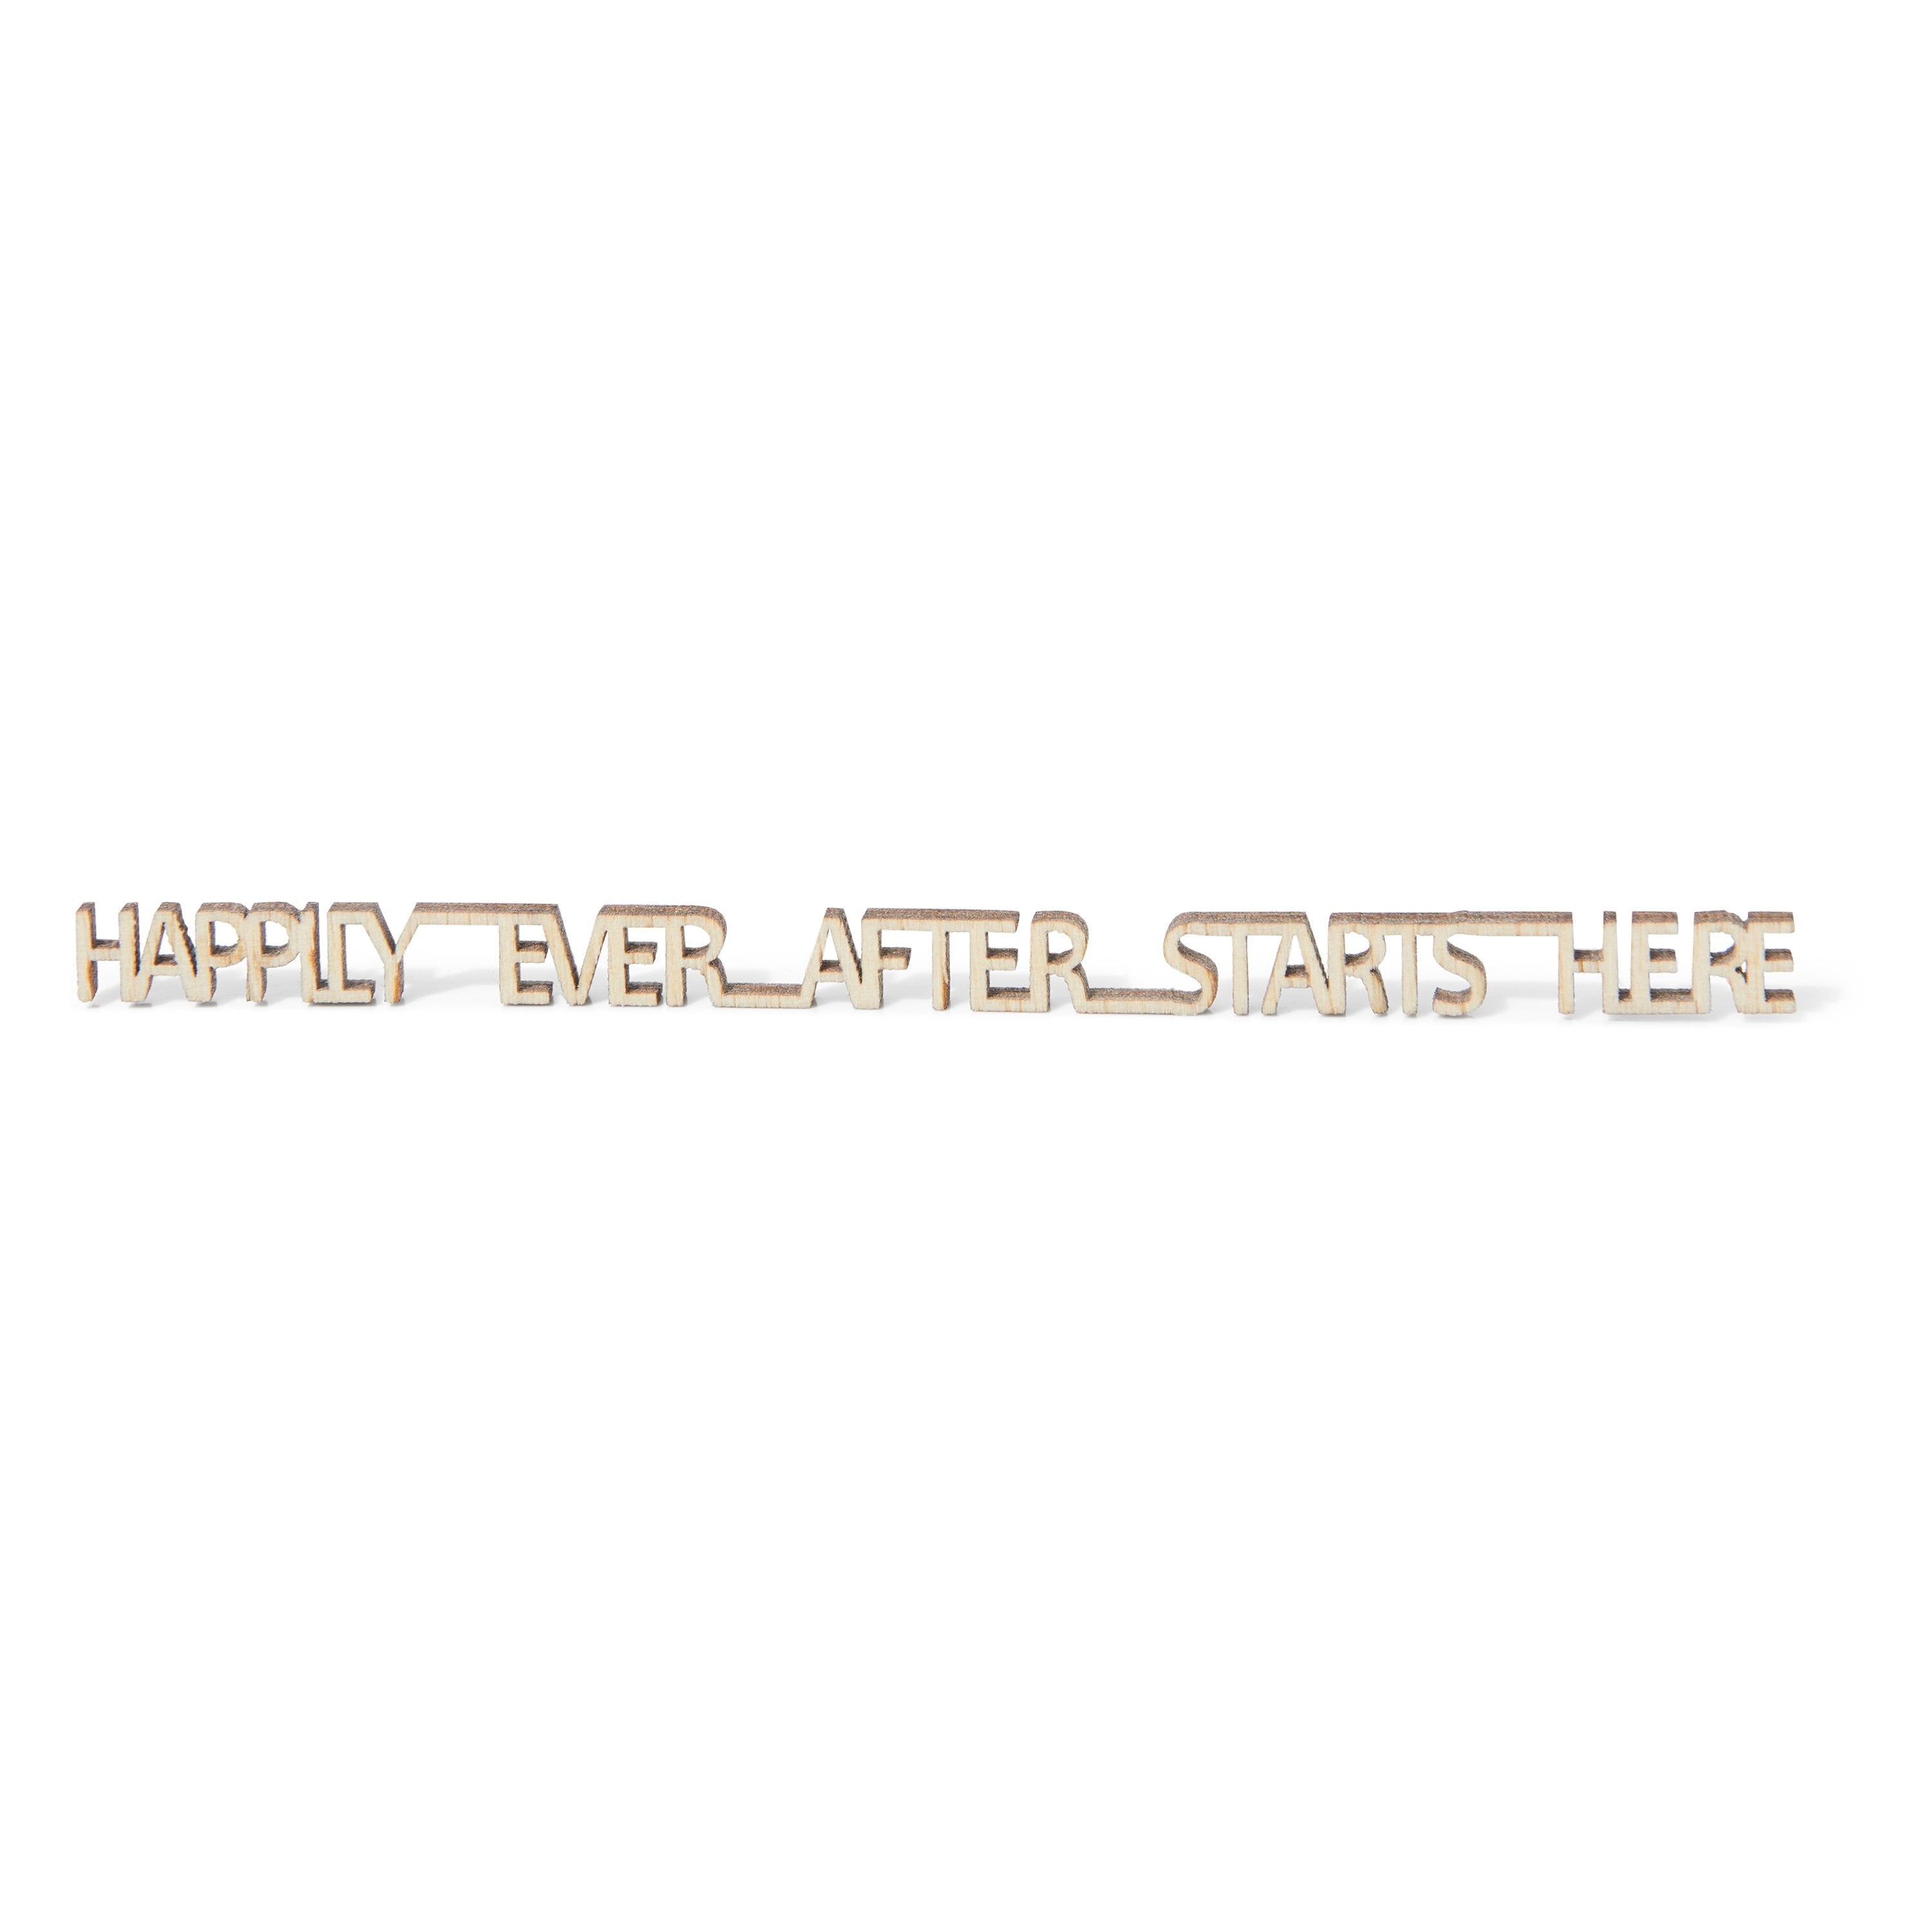 Happily ever after starts here - Birambi